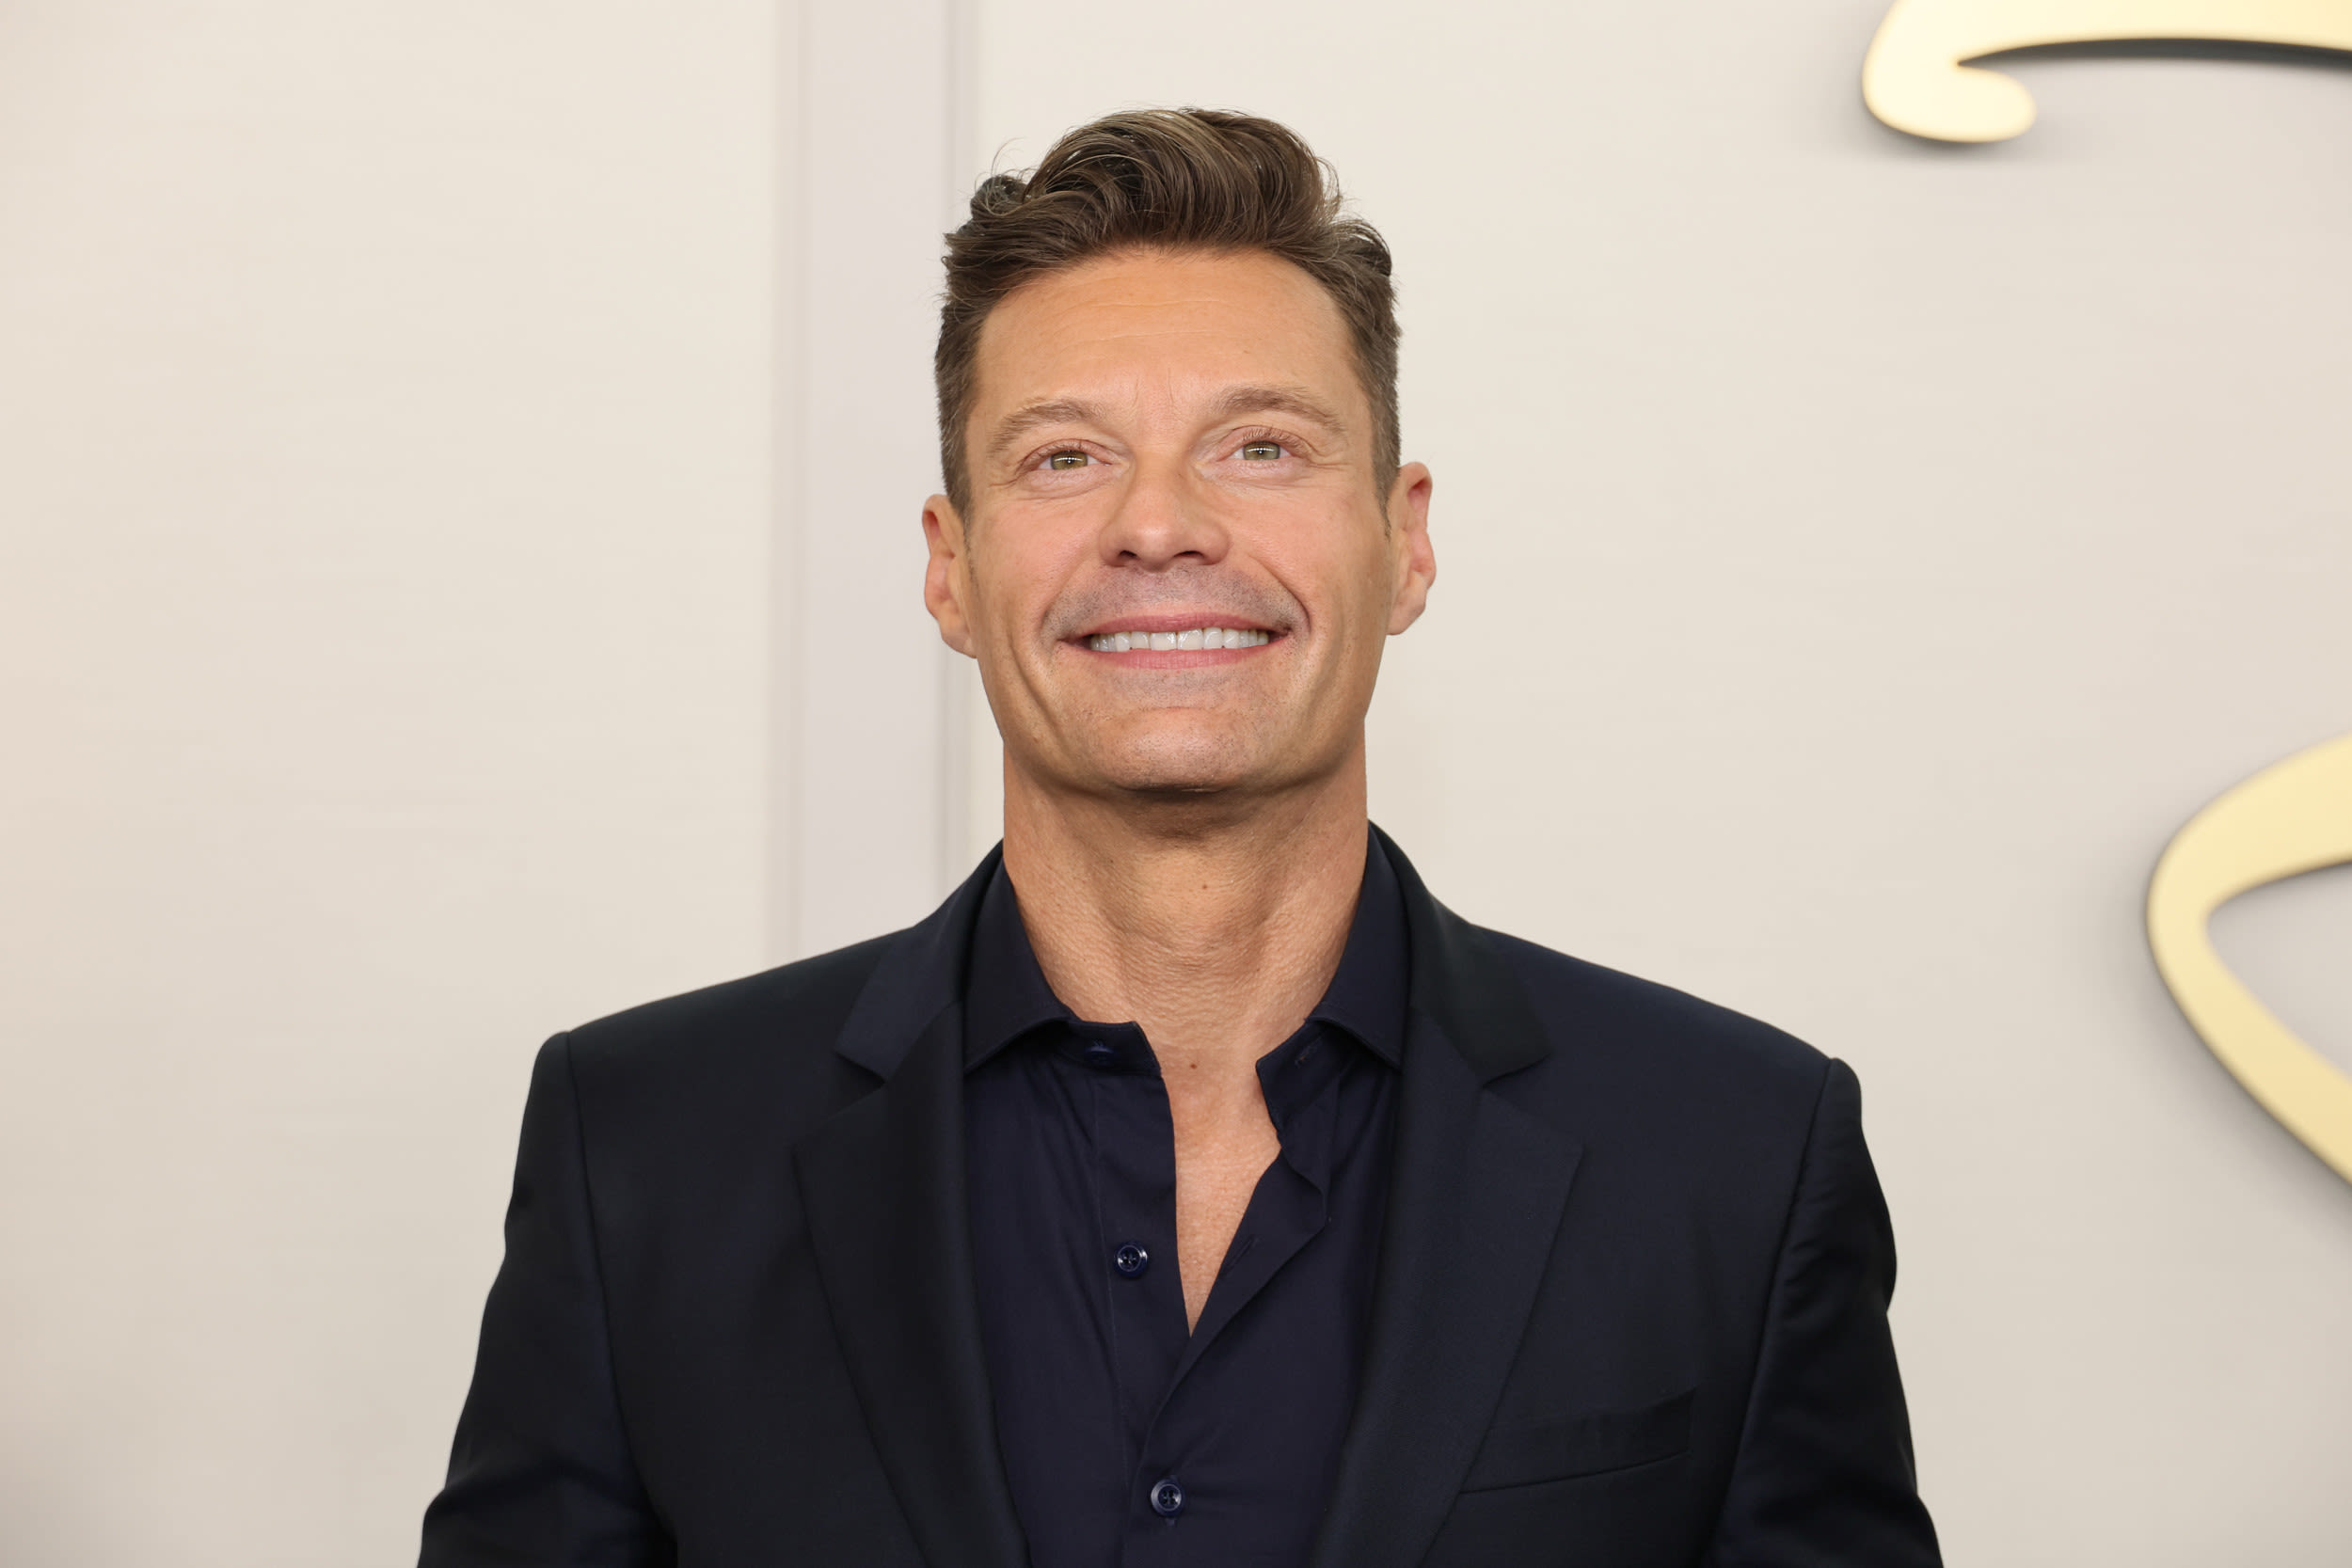 Ryan Seacrest reveals backstage secrets during 1st day on Wheel of Fortune